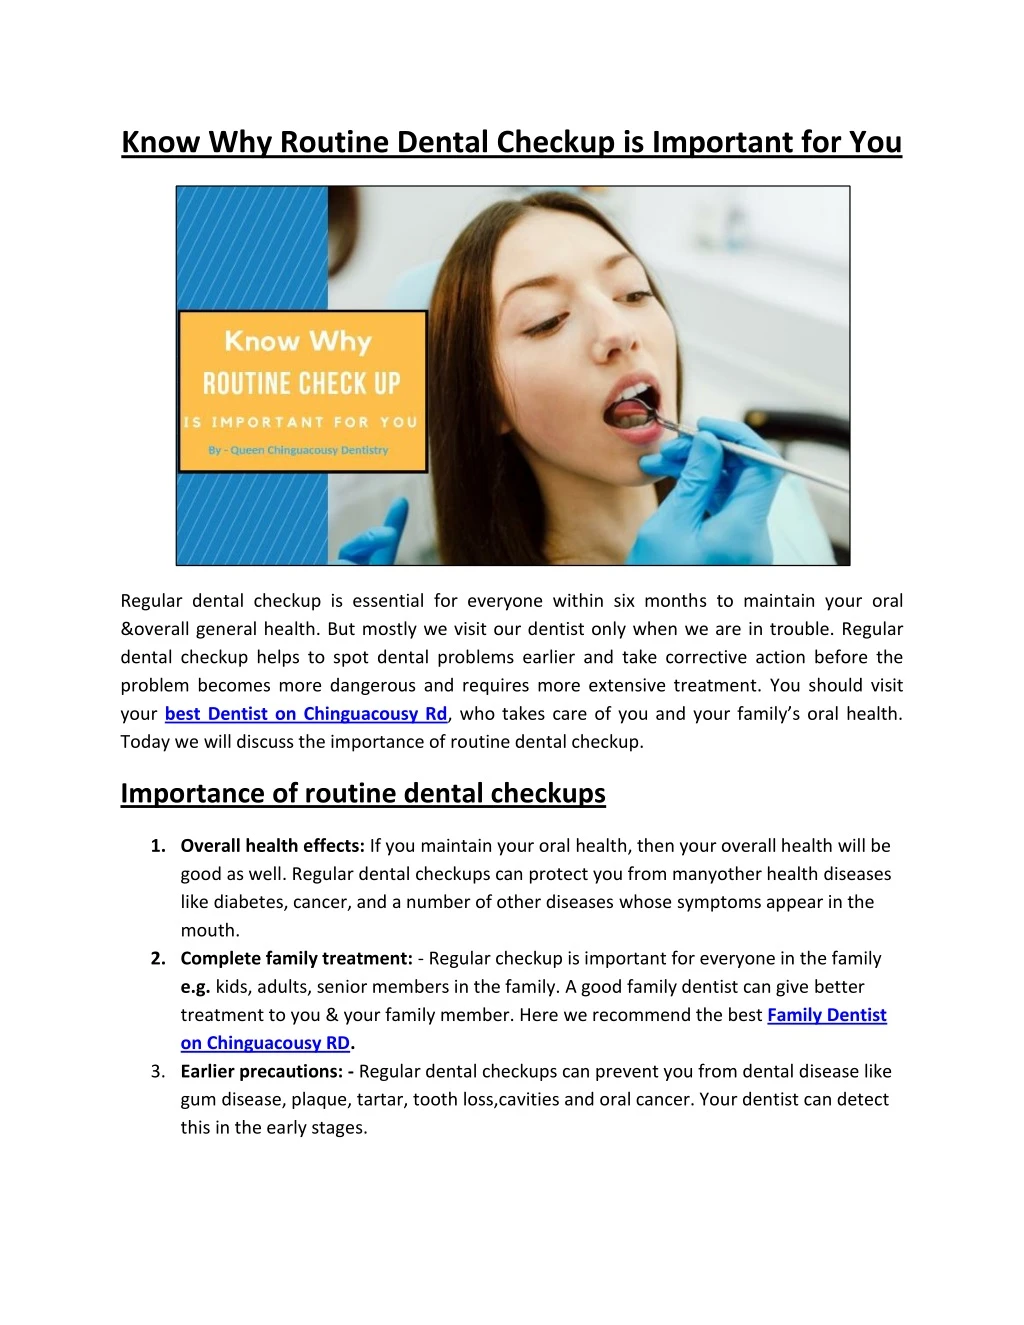 know why routine dental checkup is important